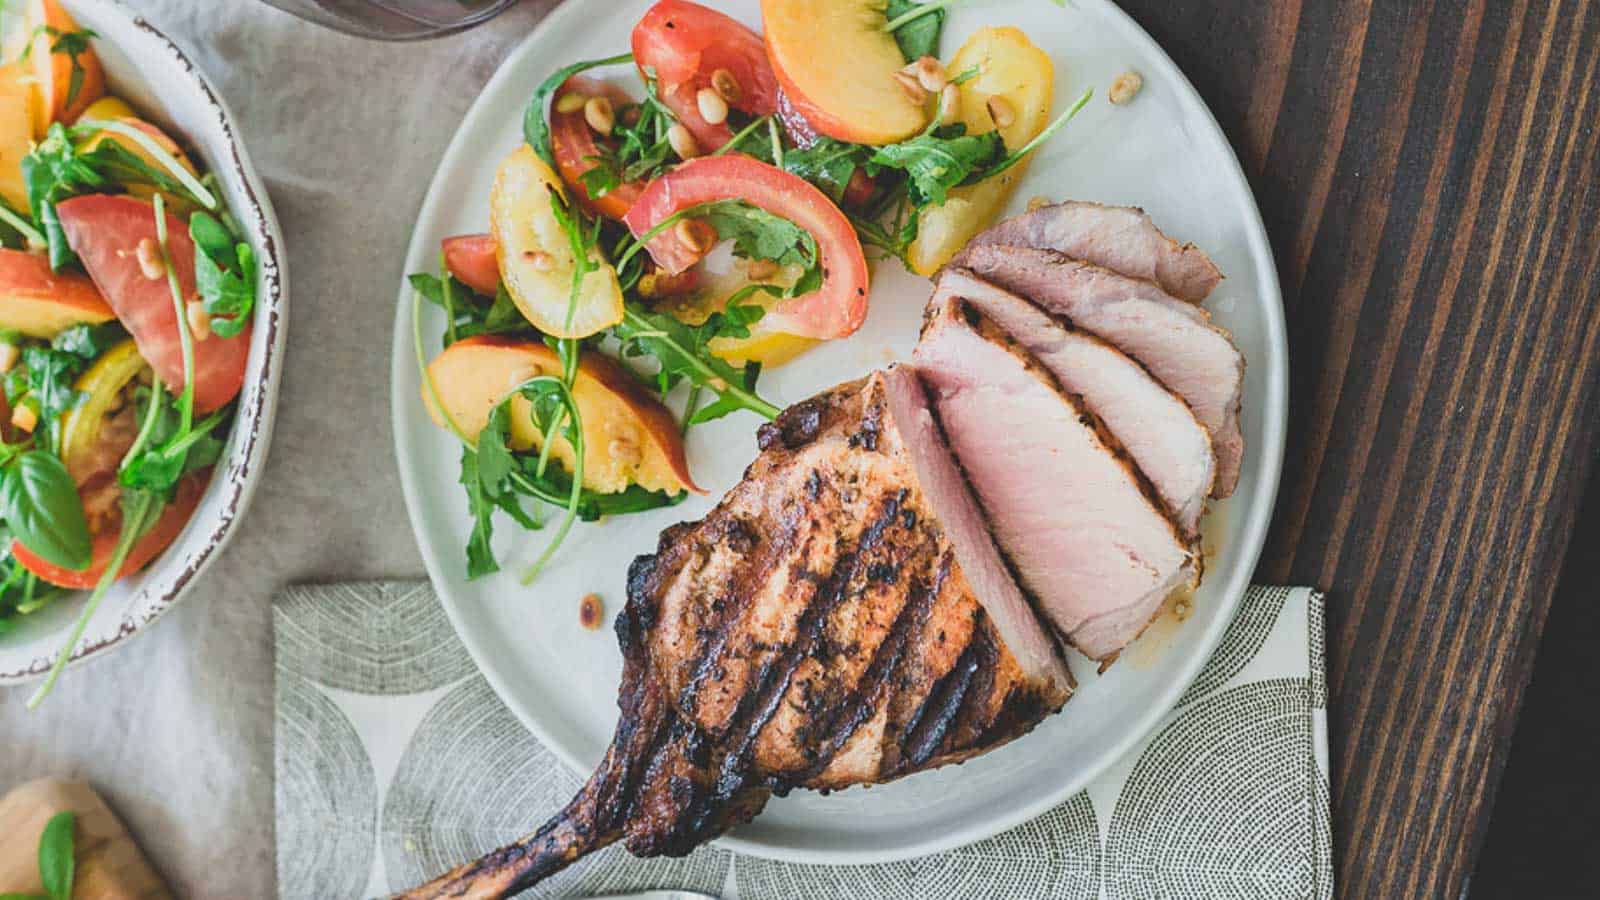 Grilled pork chop on a plate with peach and tomato salad.